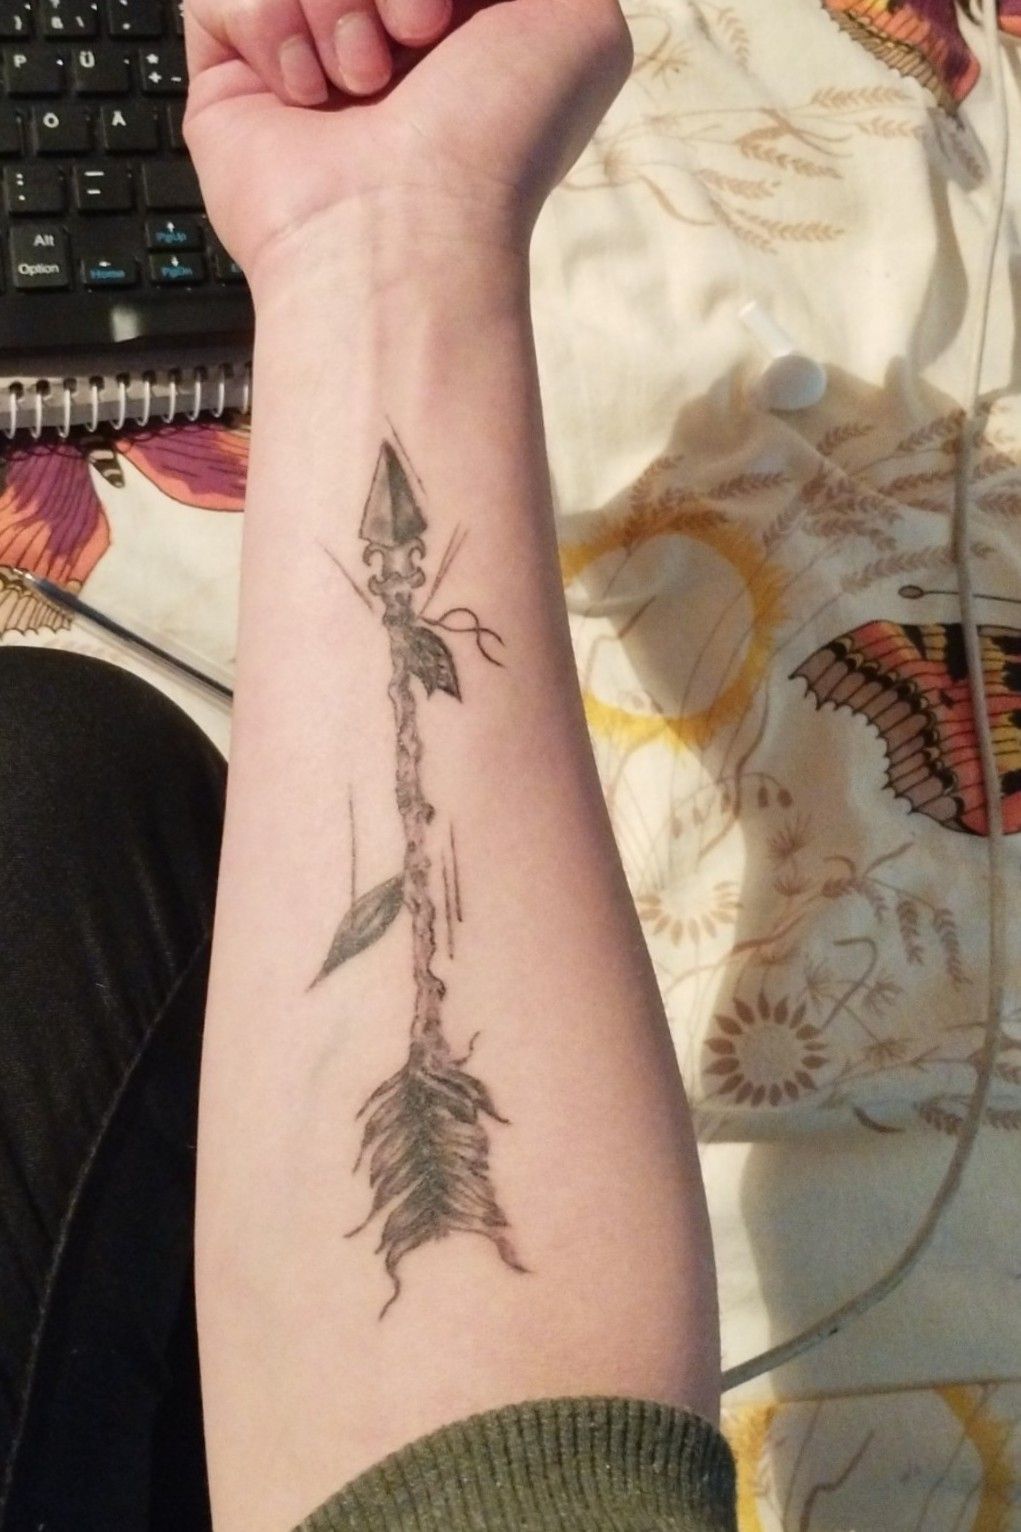 Trying to come up with a cool alt cover up for this shitty machine tattoo  lol its inconvenient where it is so I wanna cover it  rsticknpokes